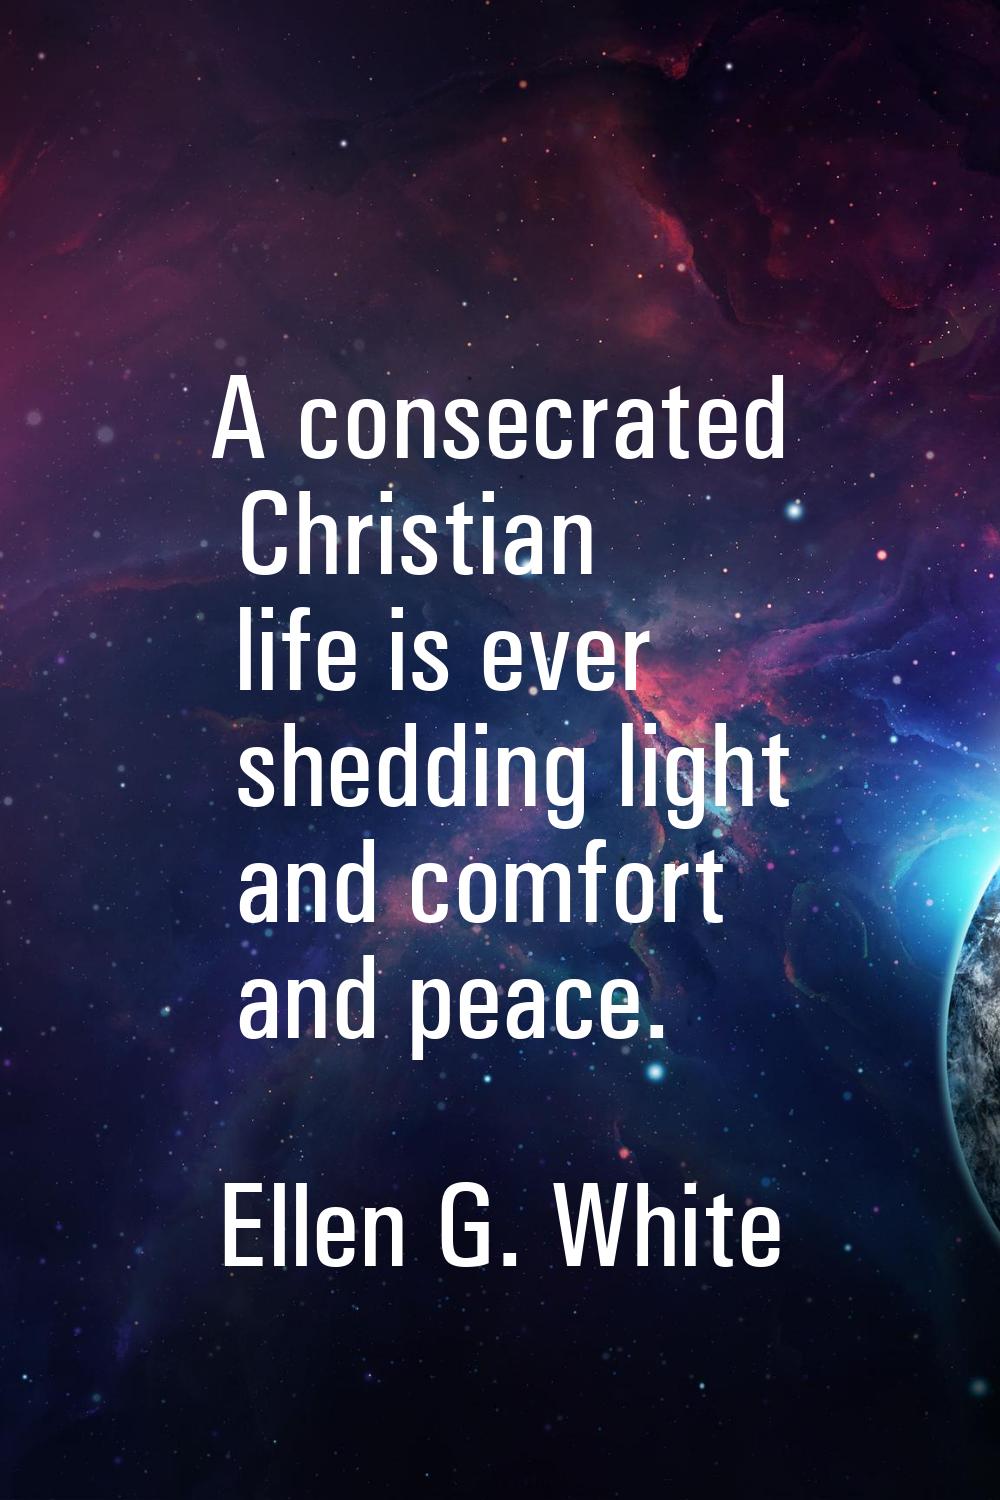 A consecrated Christian life is ever shedding light and comfort and peace.